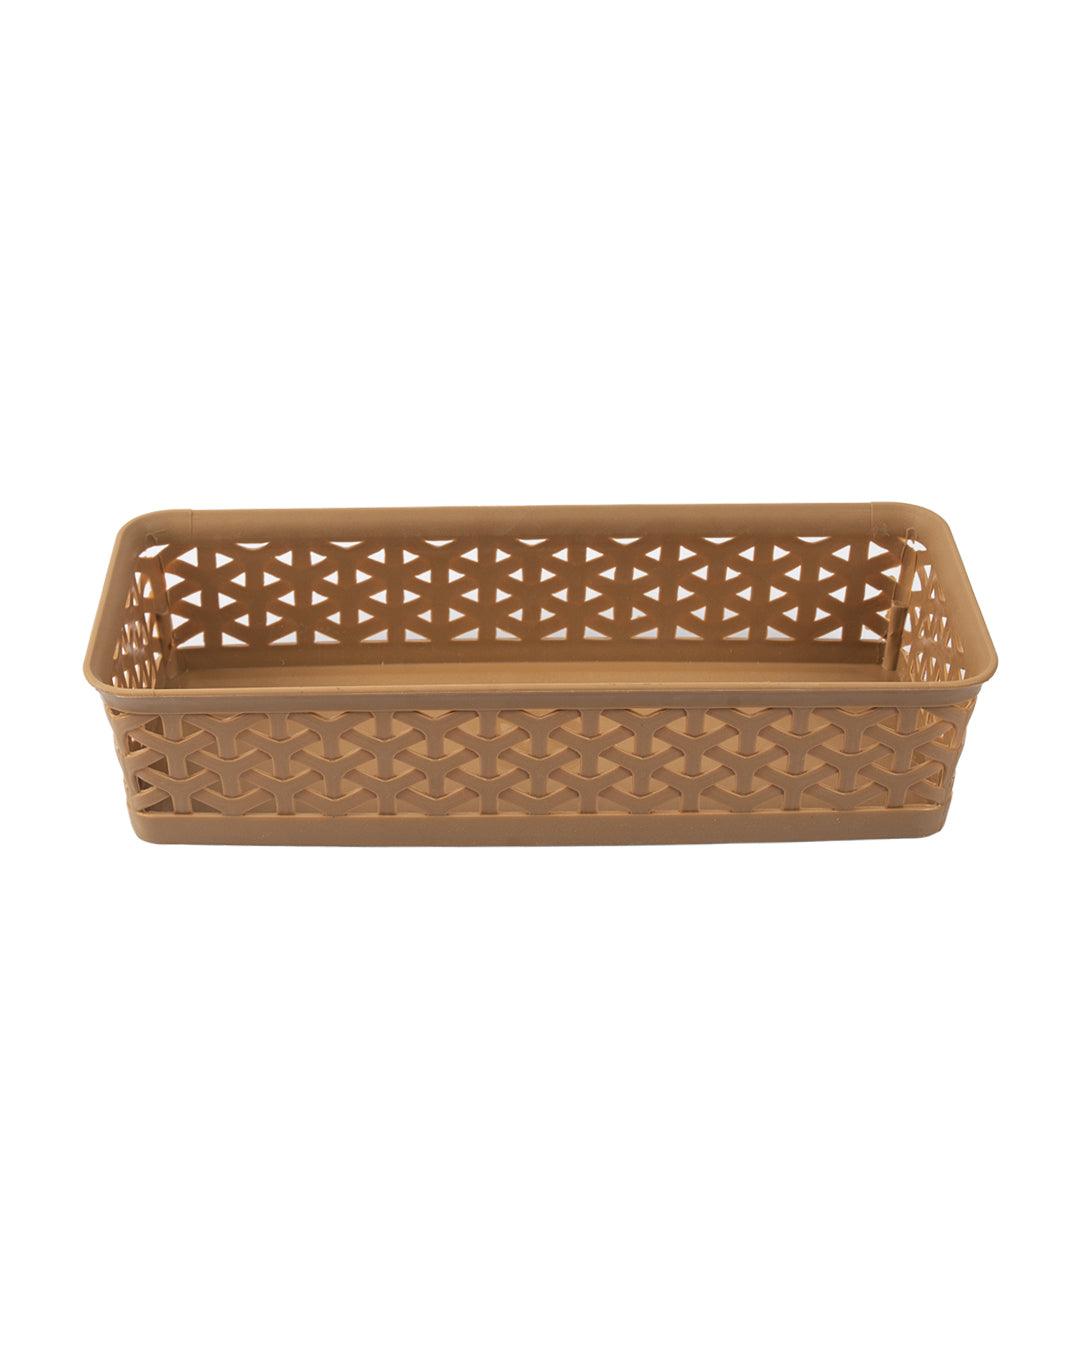 https://market99.com/cdn/shop/files/market-99-small-plastic-multipurpose-storage-basket-set-of-6-solid-brown-colour-household-storage-containers-6-29021620273322_2048x.jpg?v=1697009826